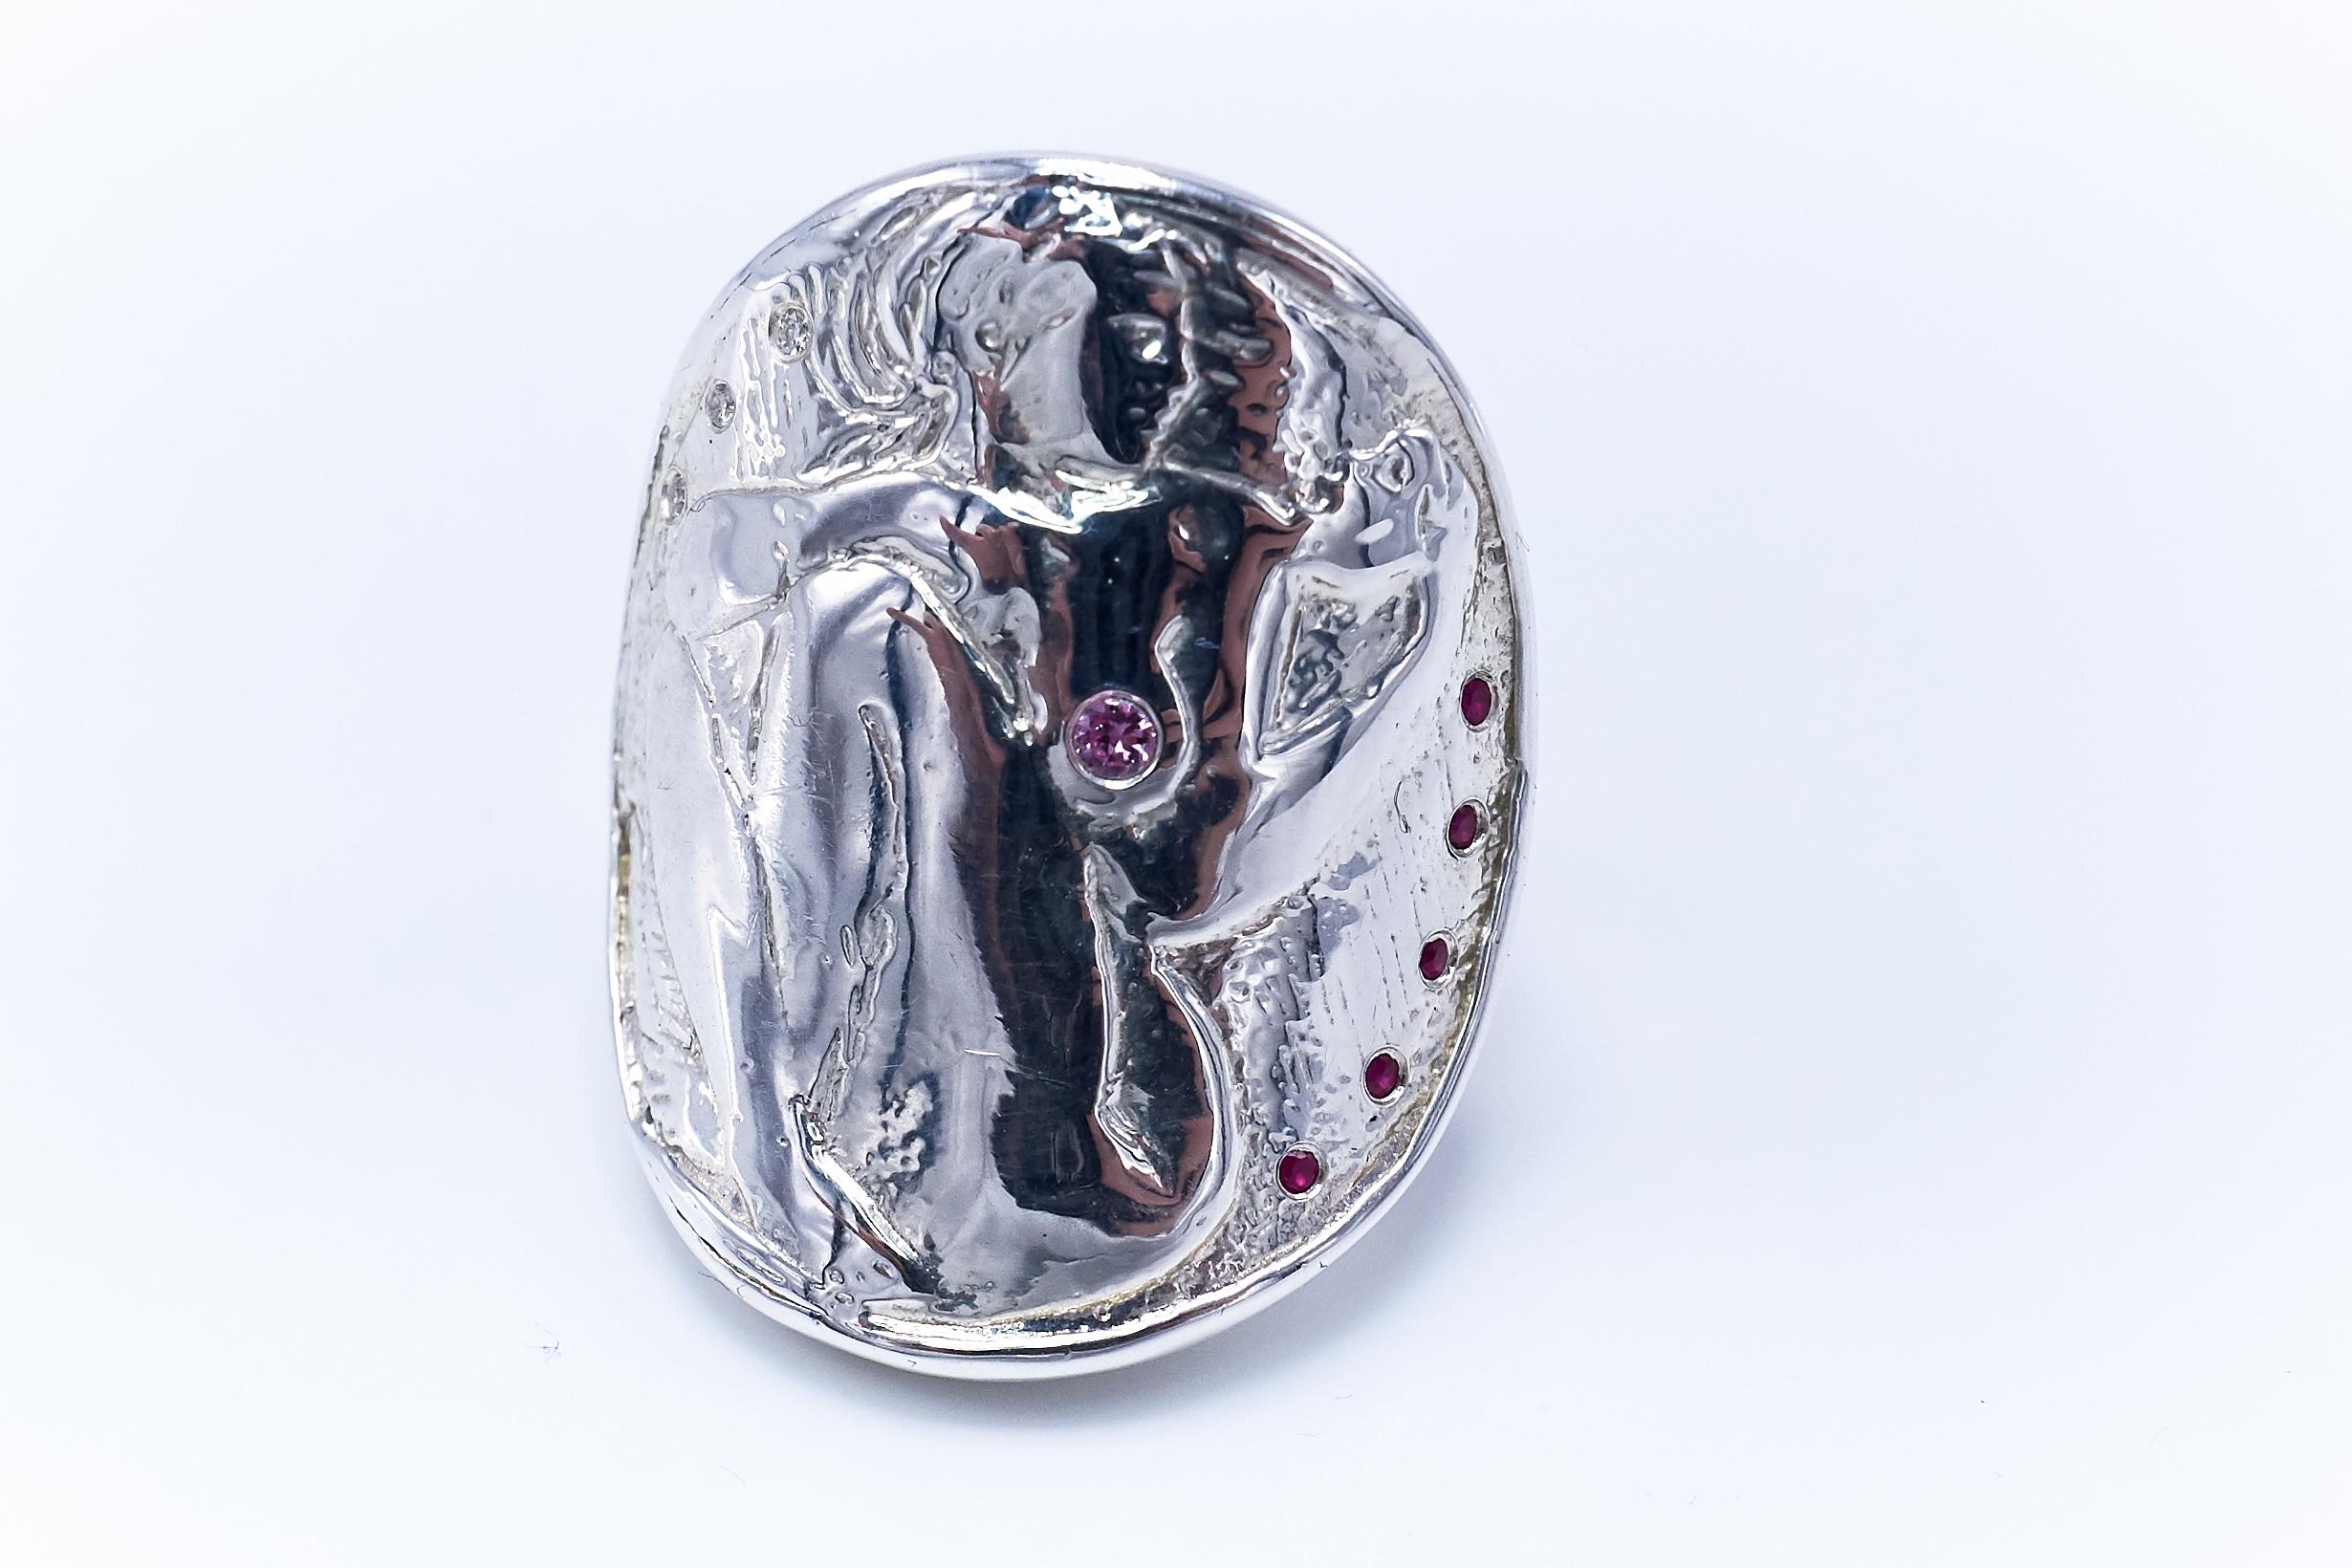 Statement Medal Ring Sterling Silver Woman Coin Diamond Ruby Sapphire J Dauphin

J DAUPHIN 